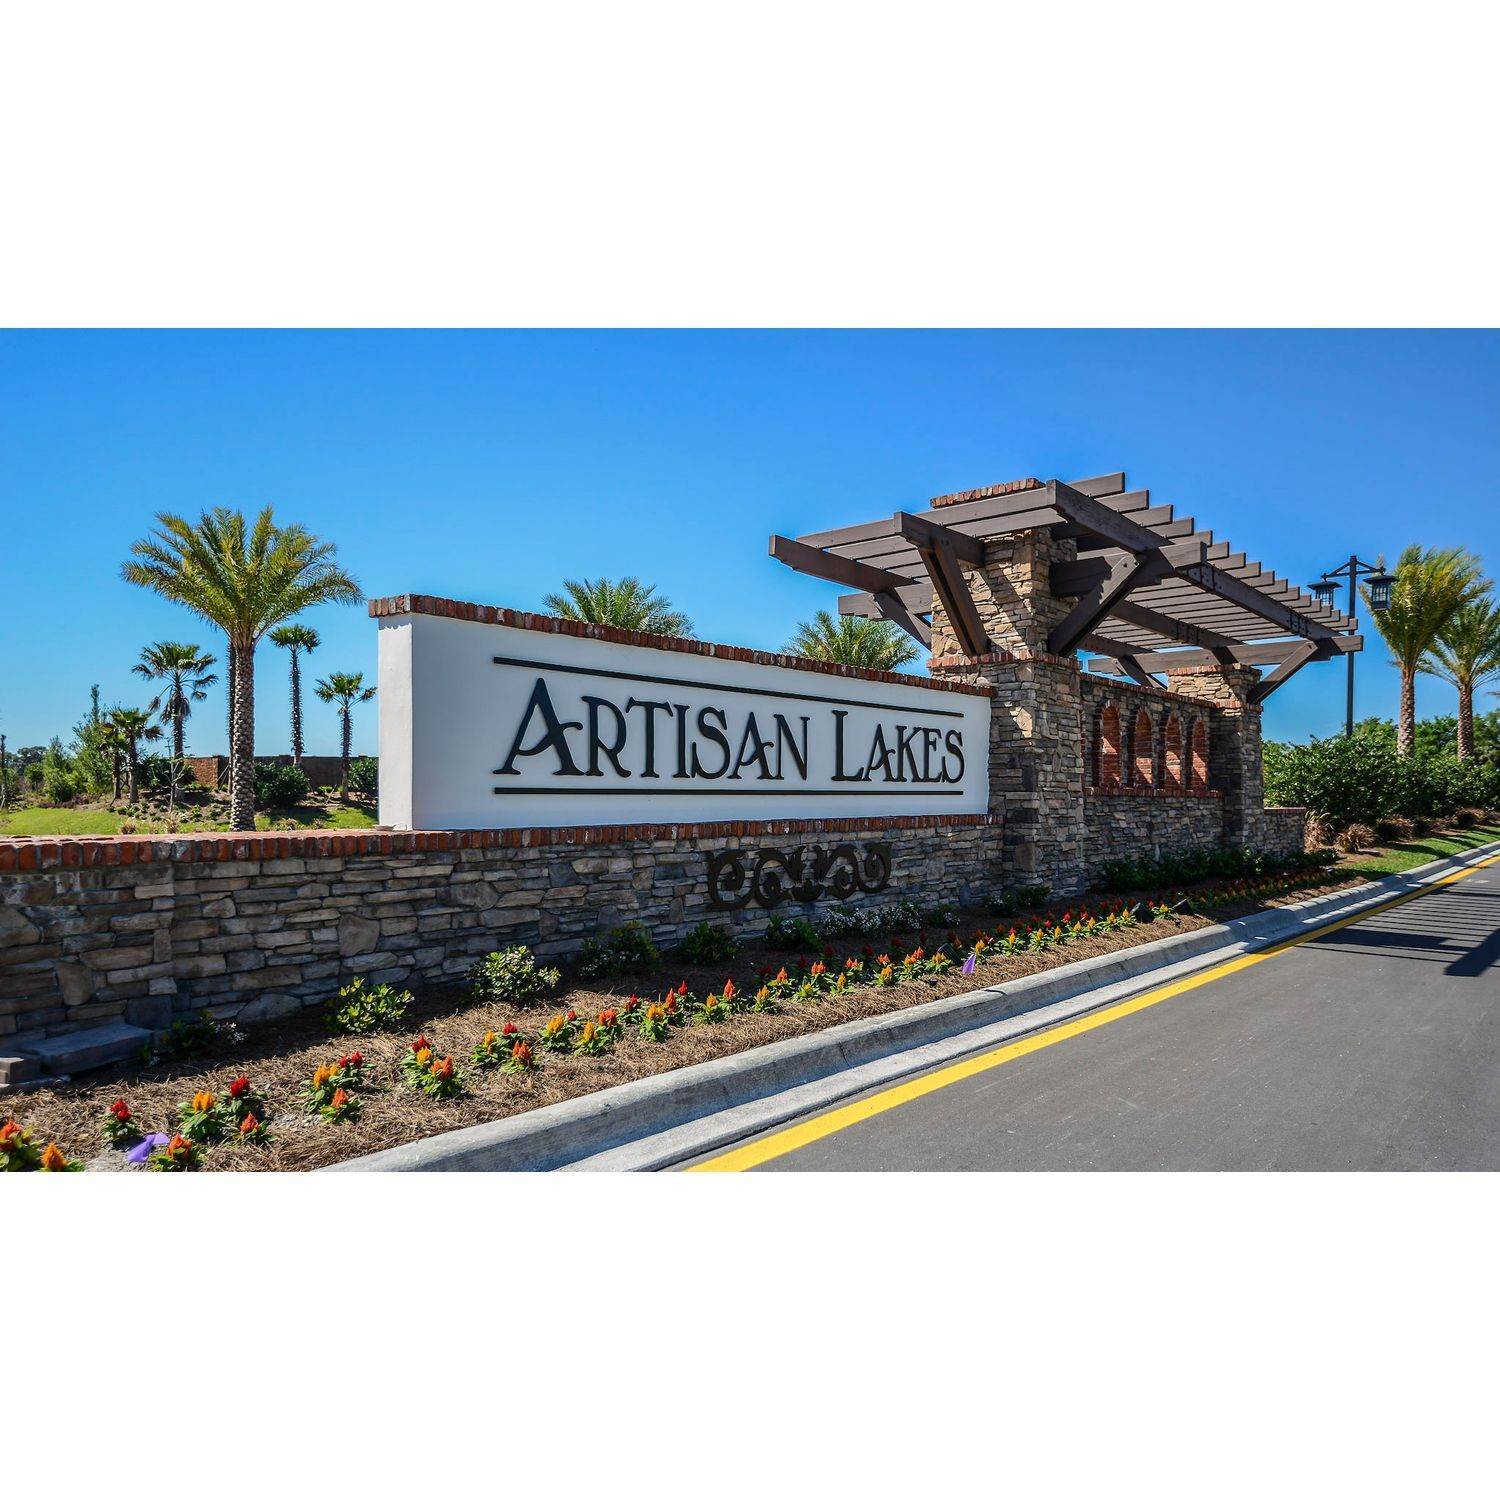 12. Eave's Bend at Artisan Lakes建於 5967 Maidenstone Way, Palmetto, FL 34221